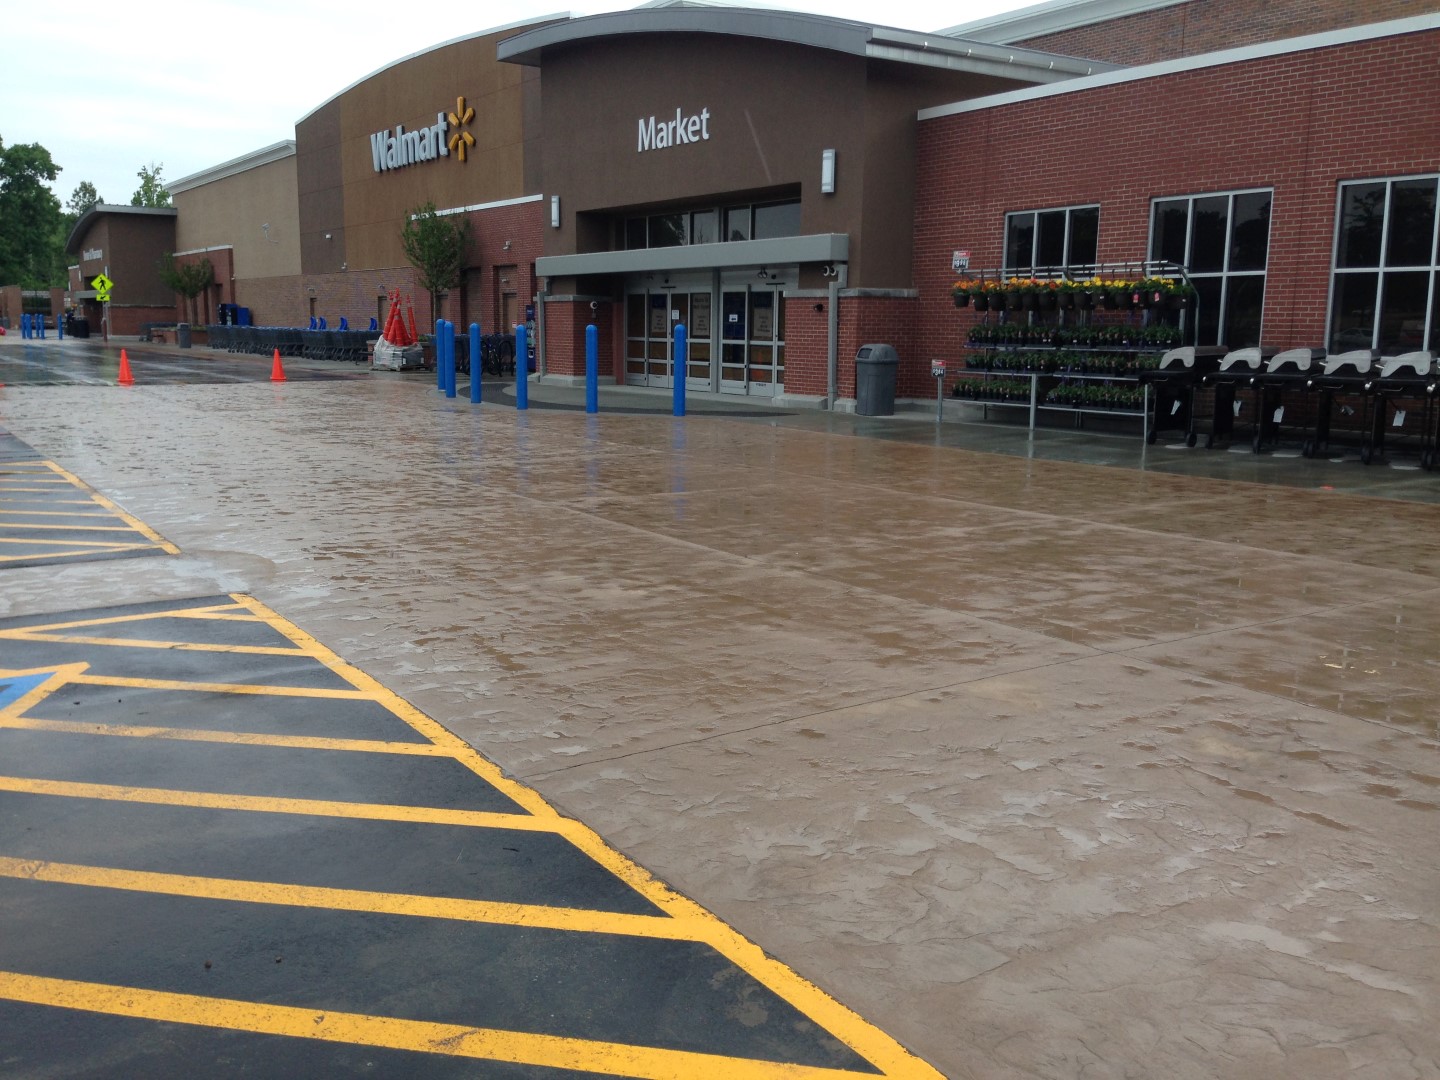 Sinclair CG Successfully completes Second Walmart job in Cumming, Georgia and wins Decorative Concrete Award